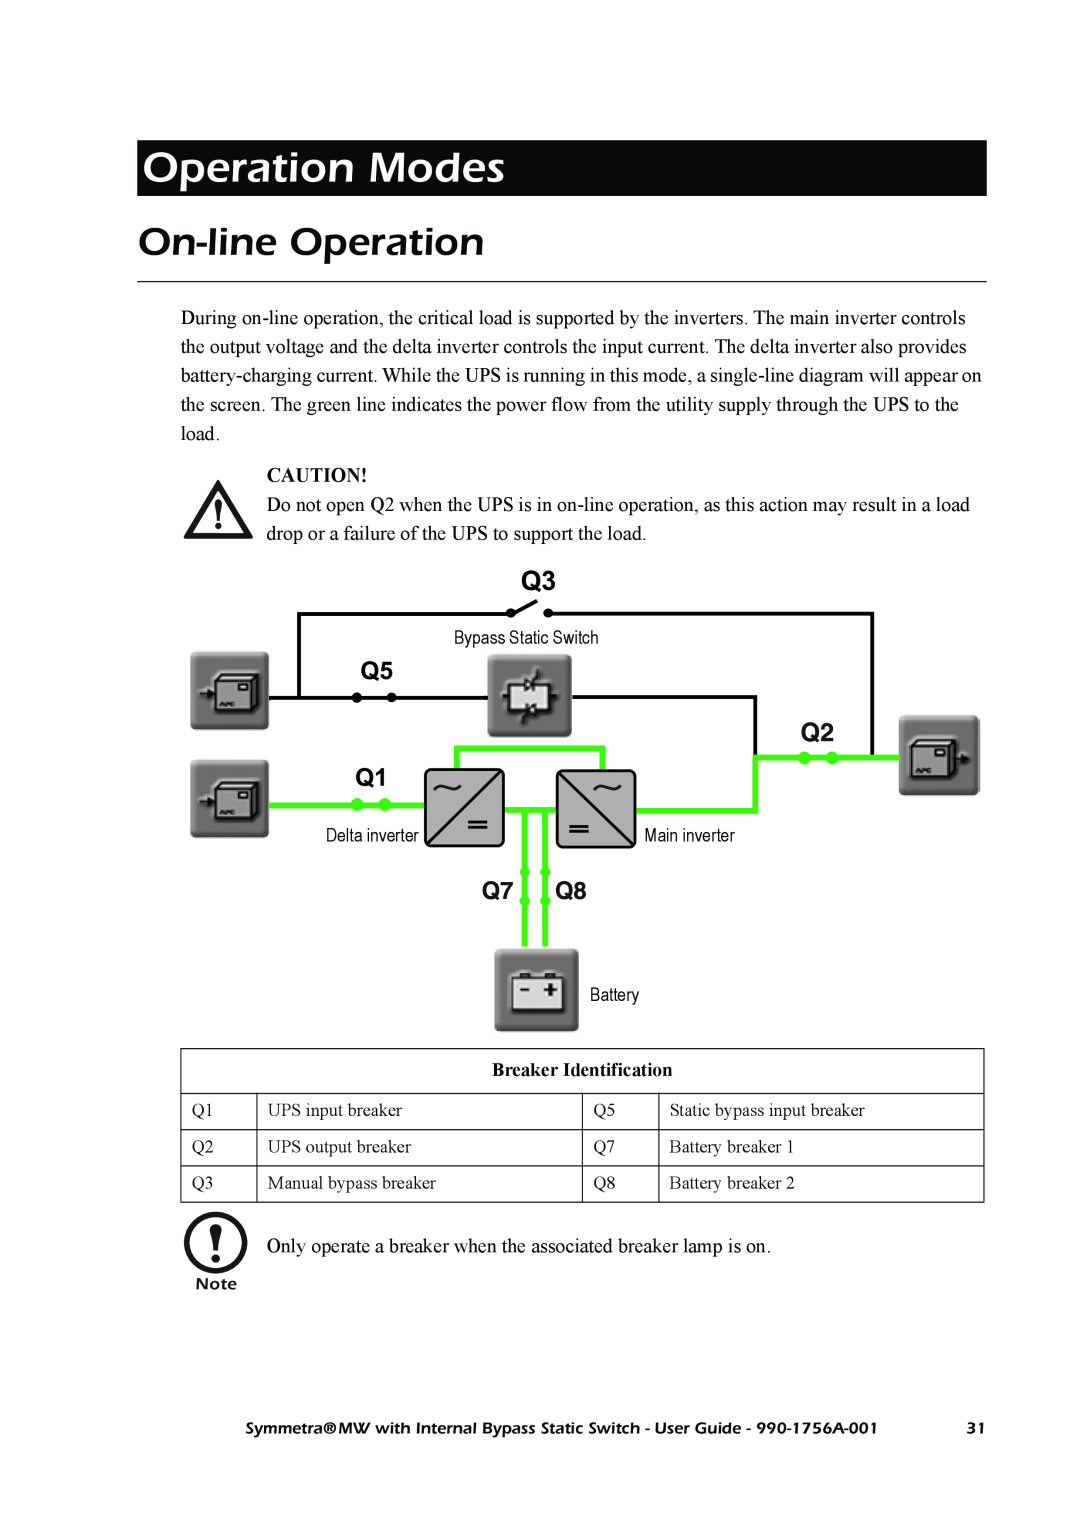 American Power Conversion Bypass Static manual Operation Modes, On-line Operation 